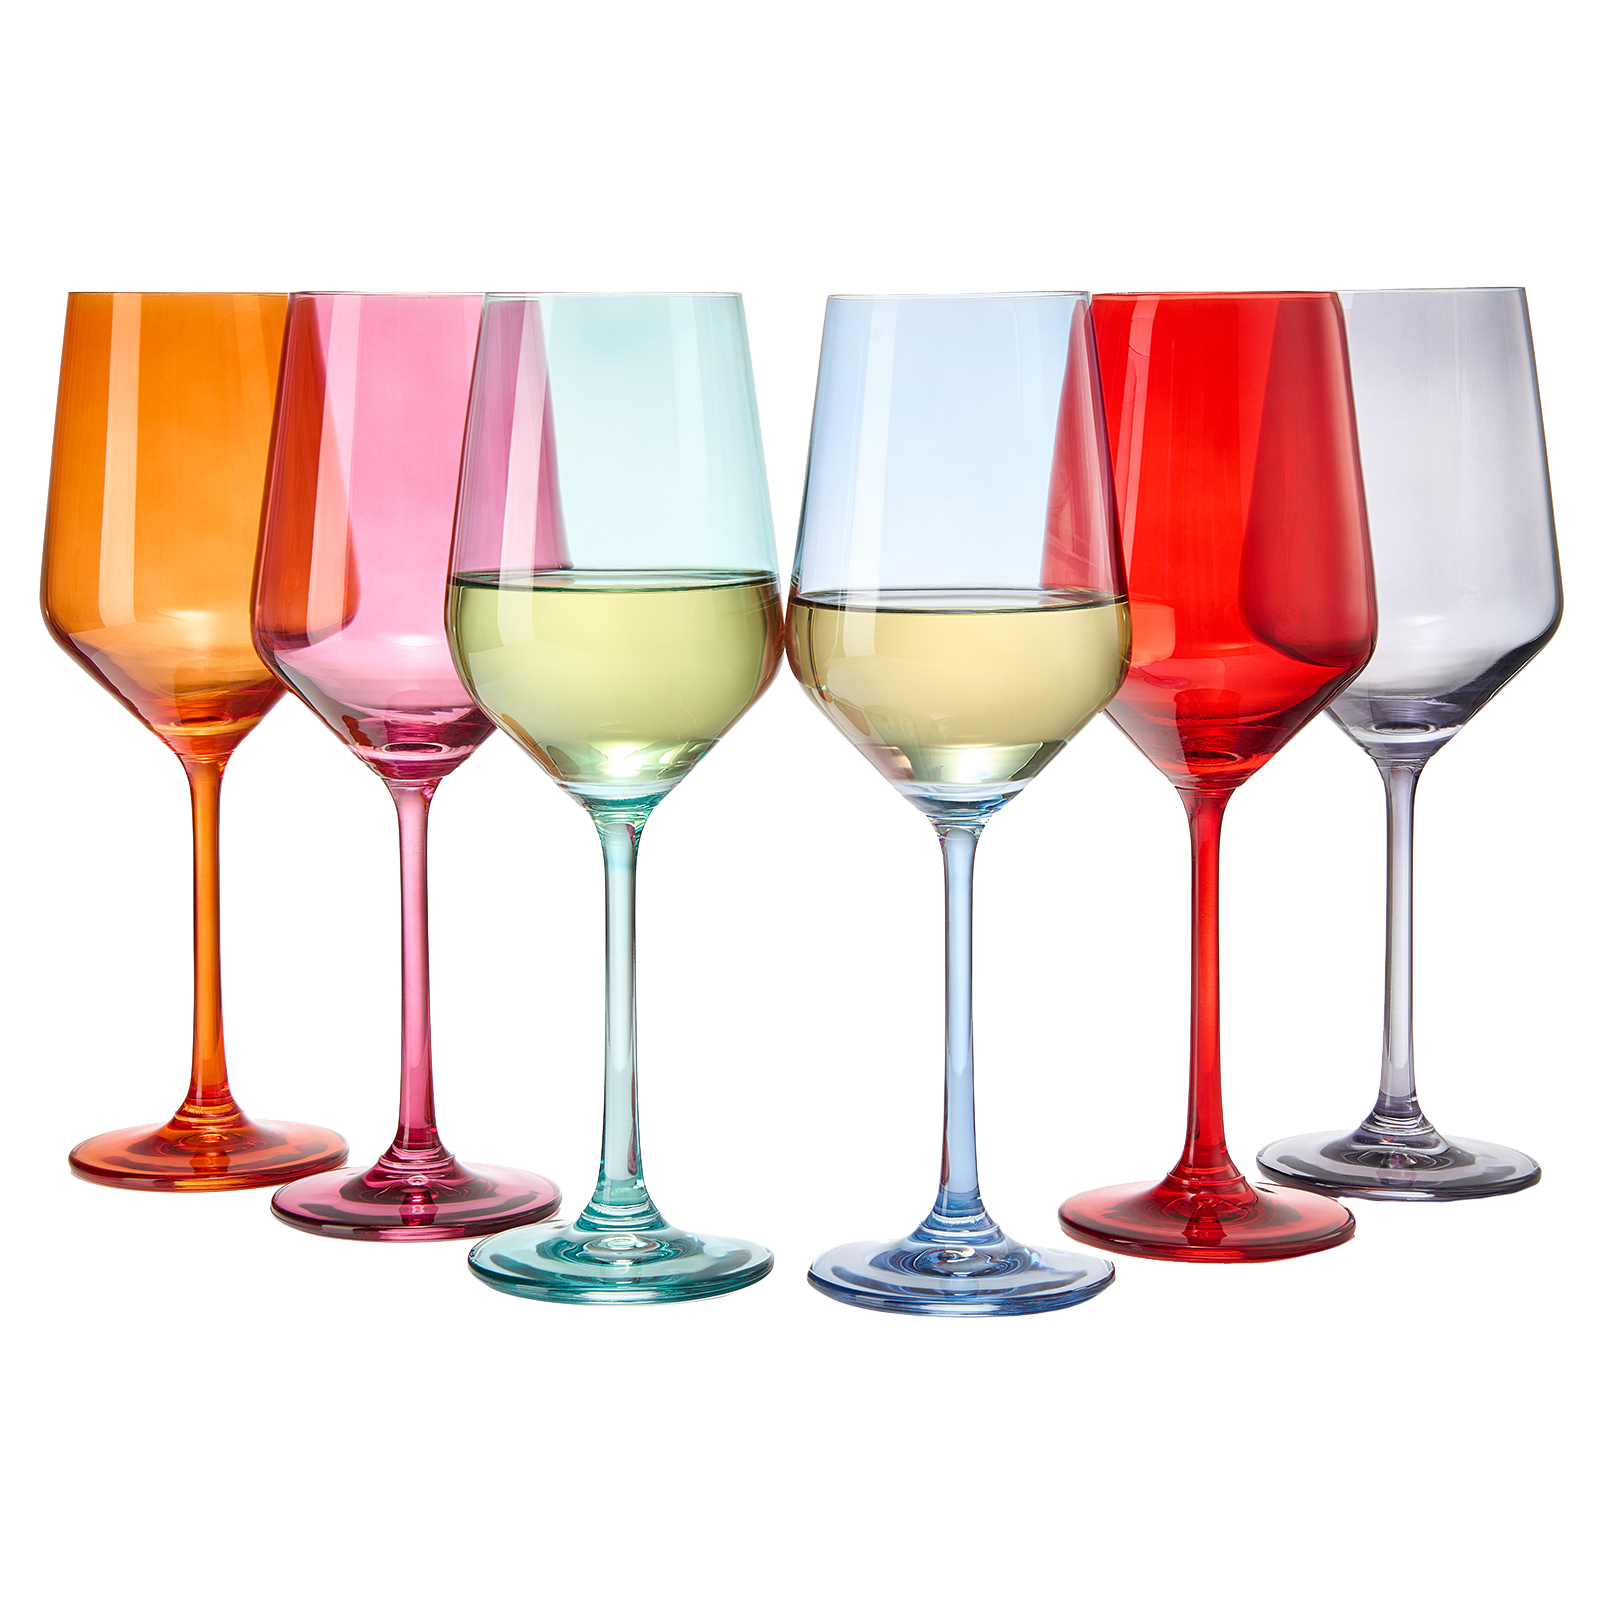 Make Your Own Set Wine Glass SINGLE, Muted Grey Colored Large  12 oz Glass, Unique Italian Style Tall for White & Red Wine, Gifts for  Mothers Day Gift, Set of